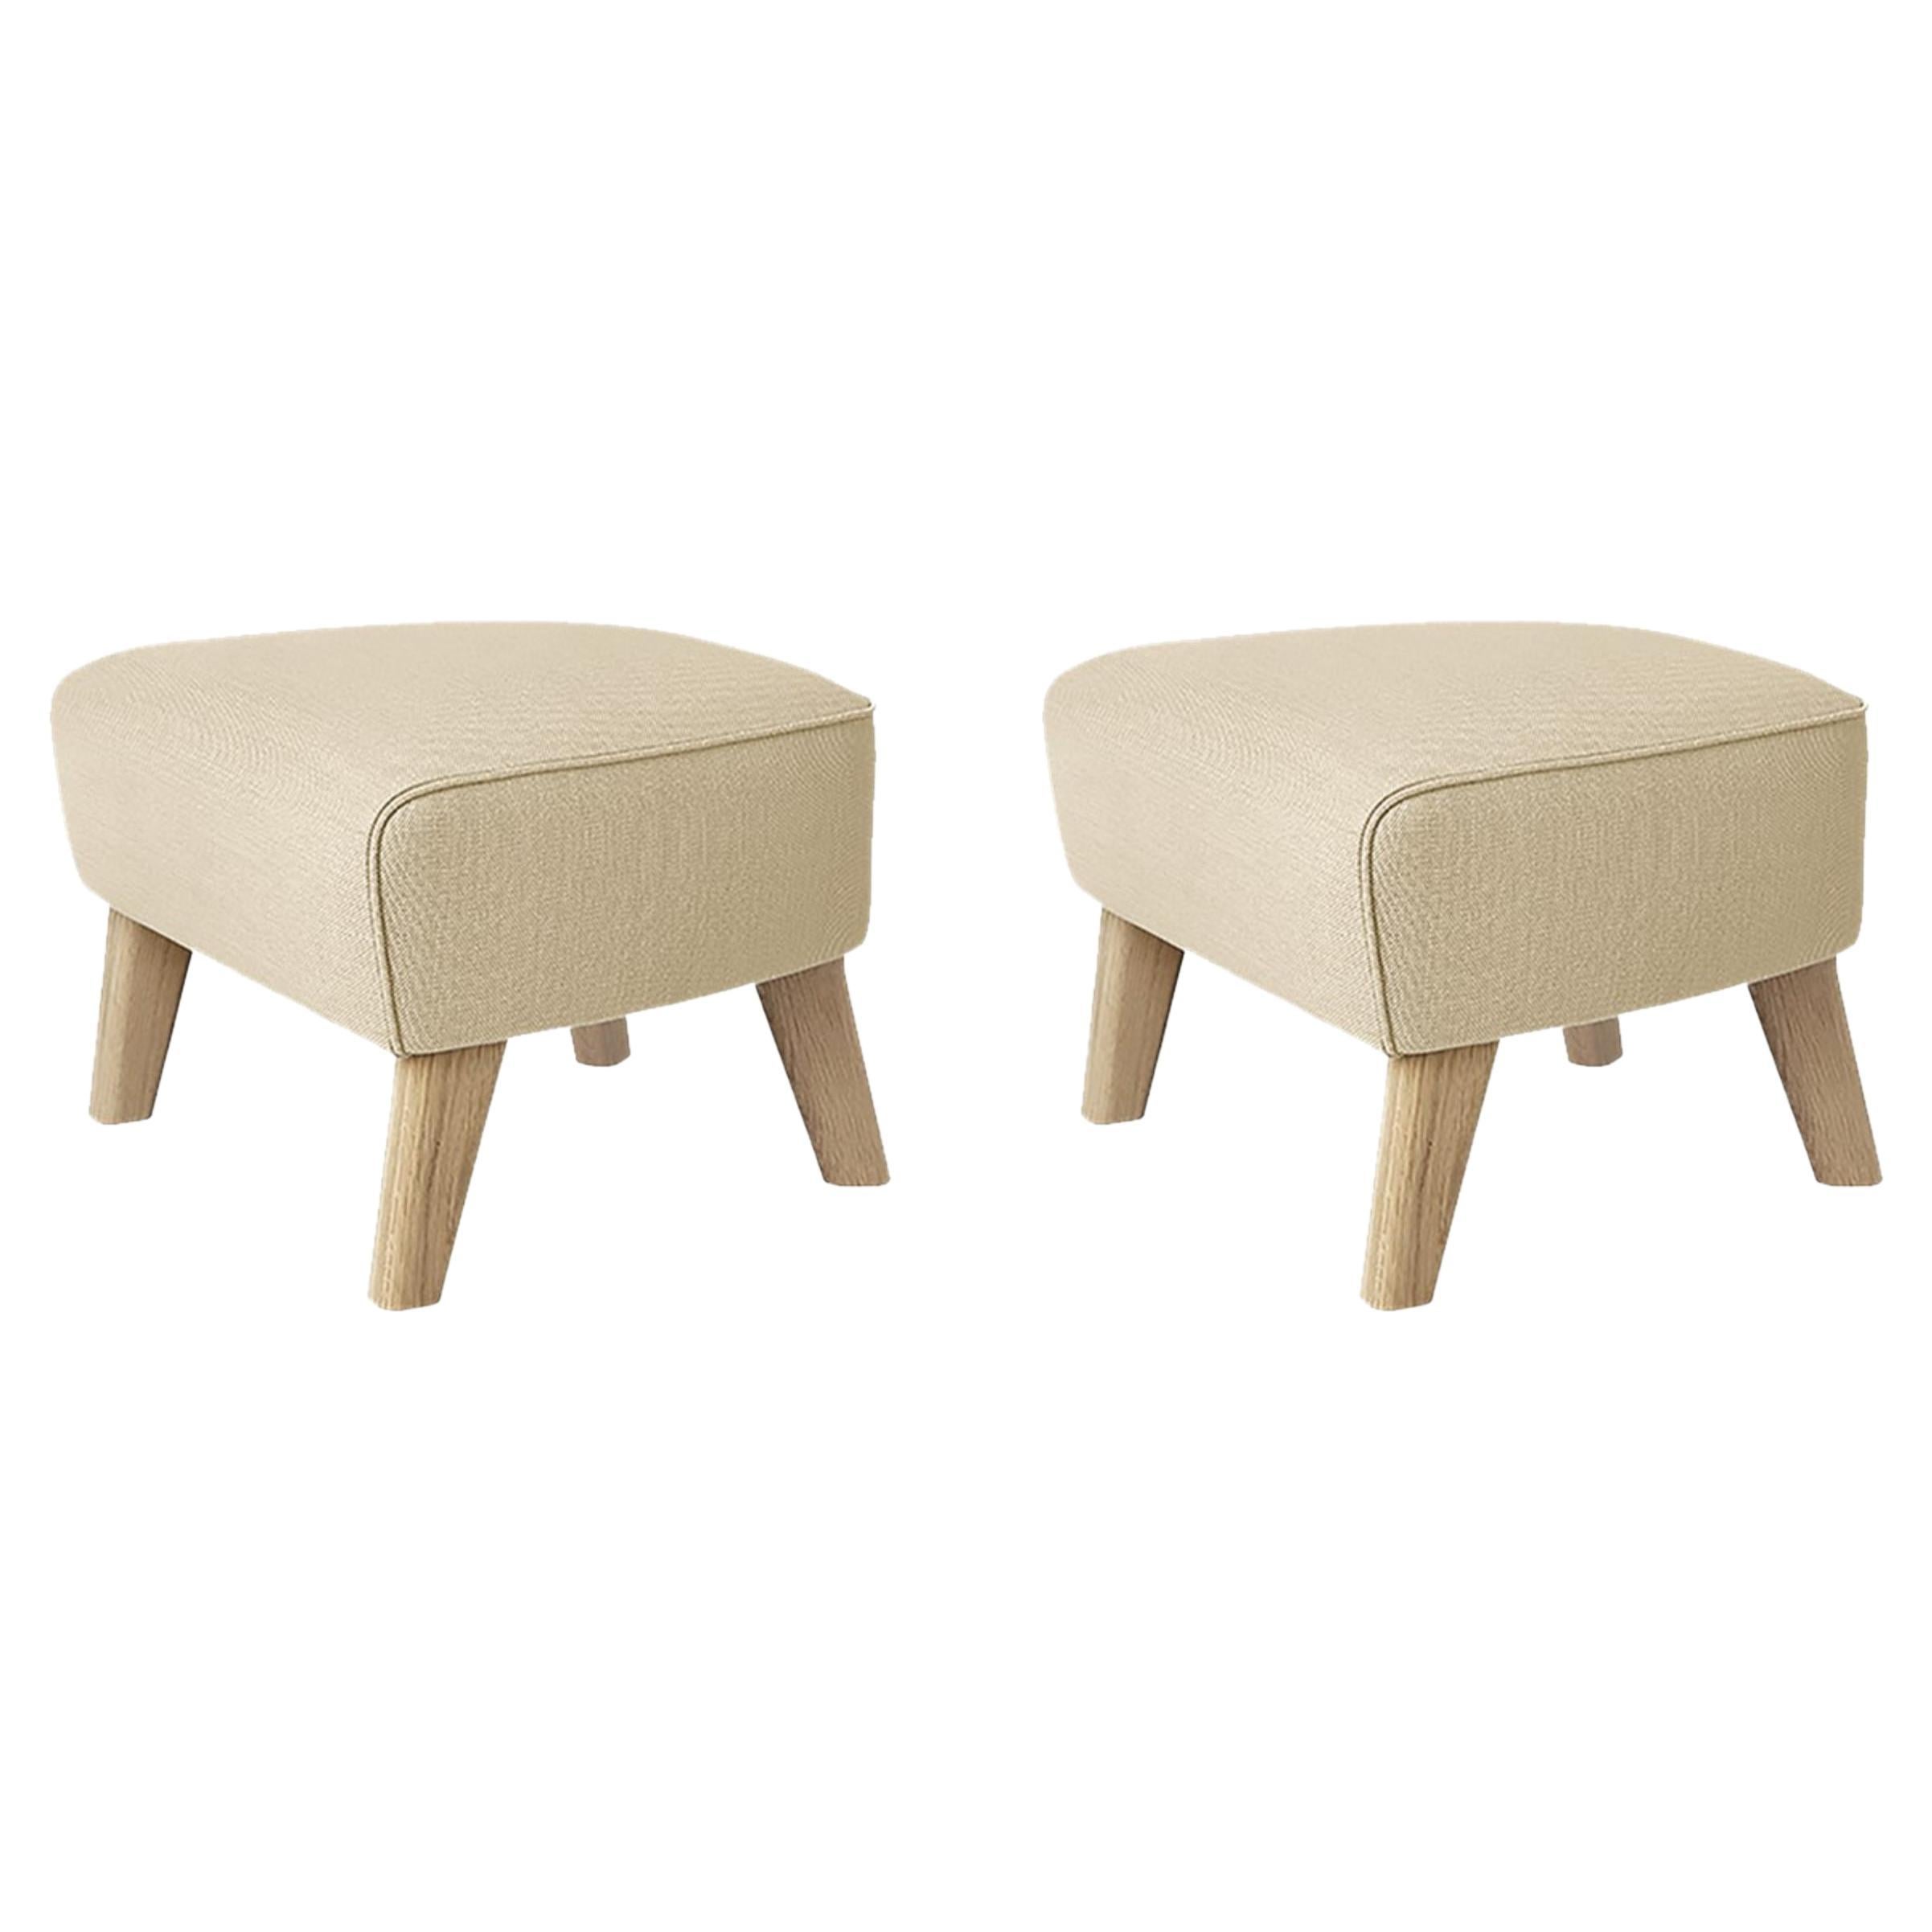 Set of 2 Sand and Natural Oak Sahco Zero Footstool by Lassen